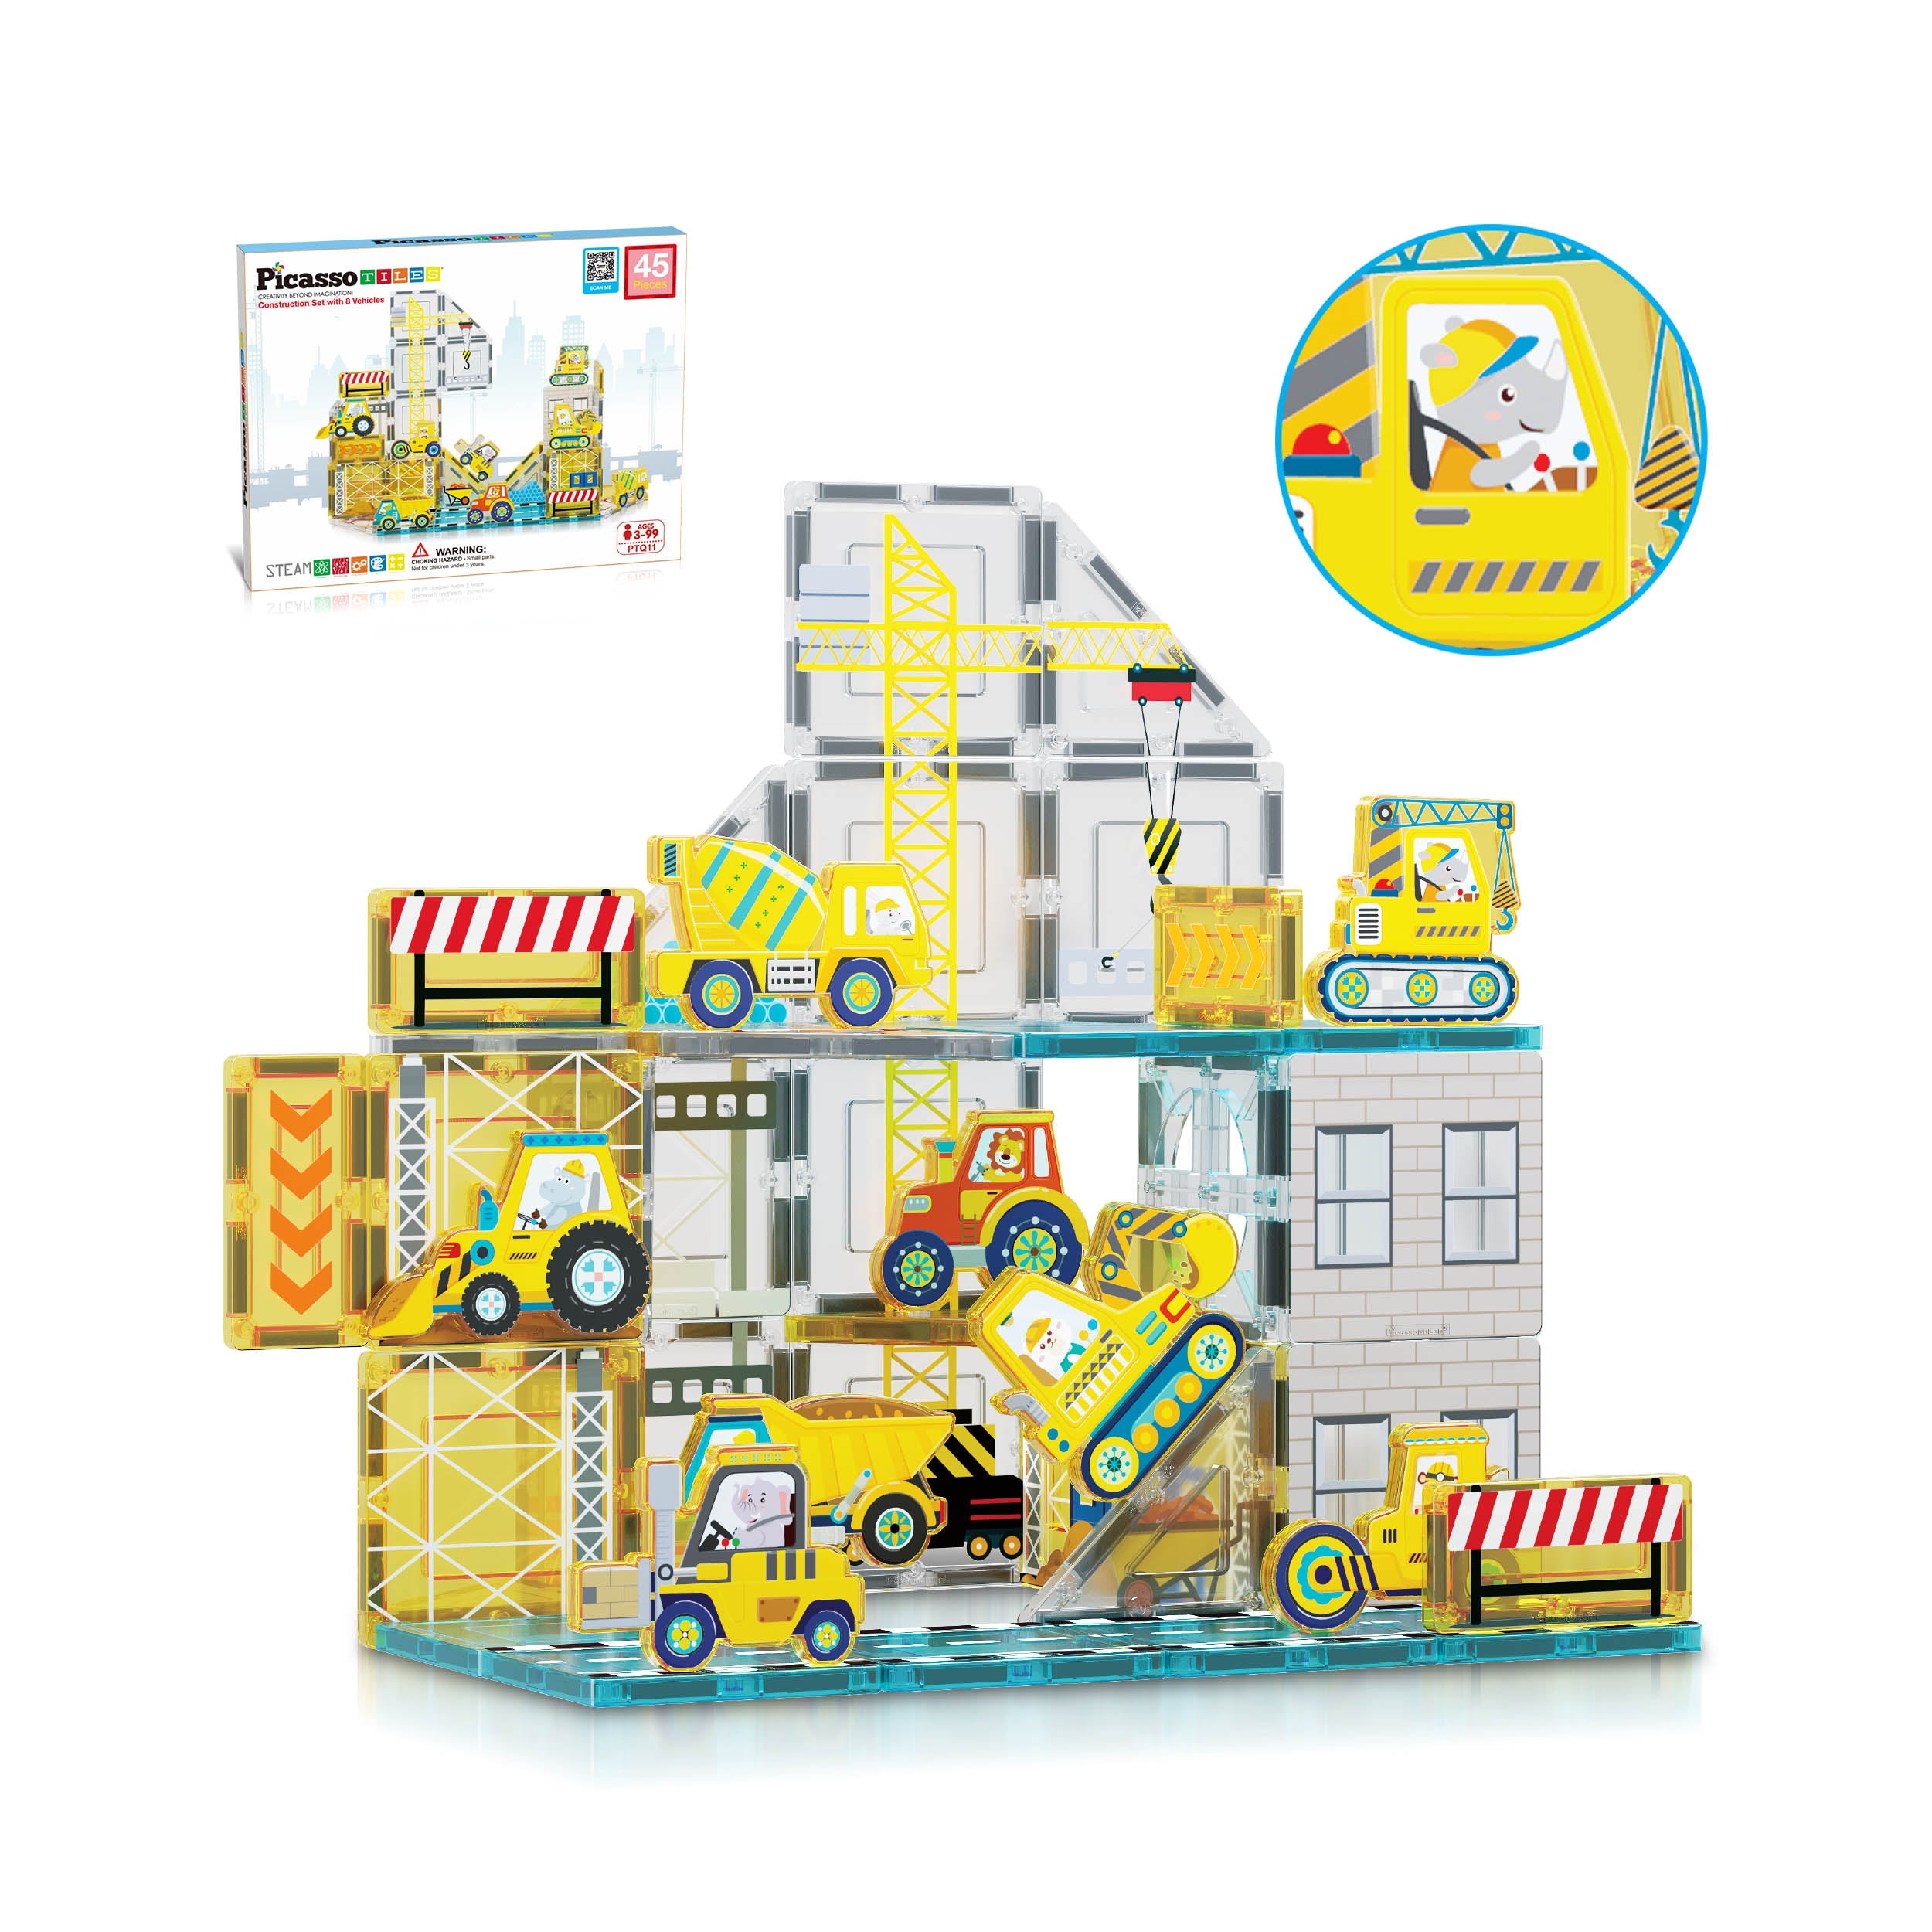 PicassoTiles 63 Piece Magnetic Building Block Set with Car Truck